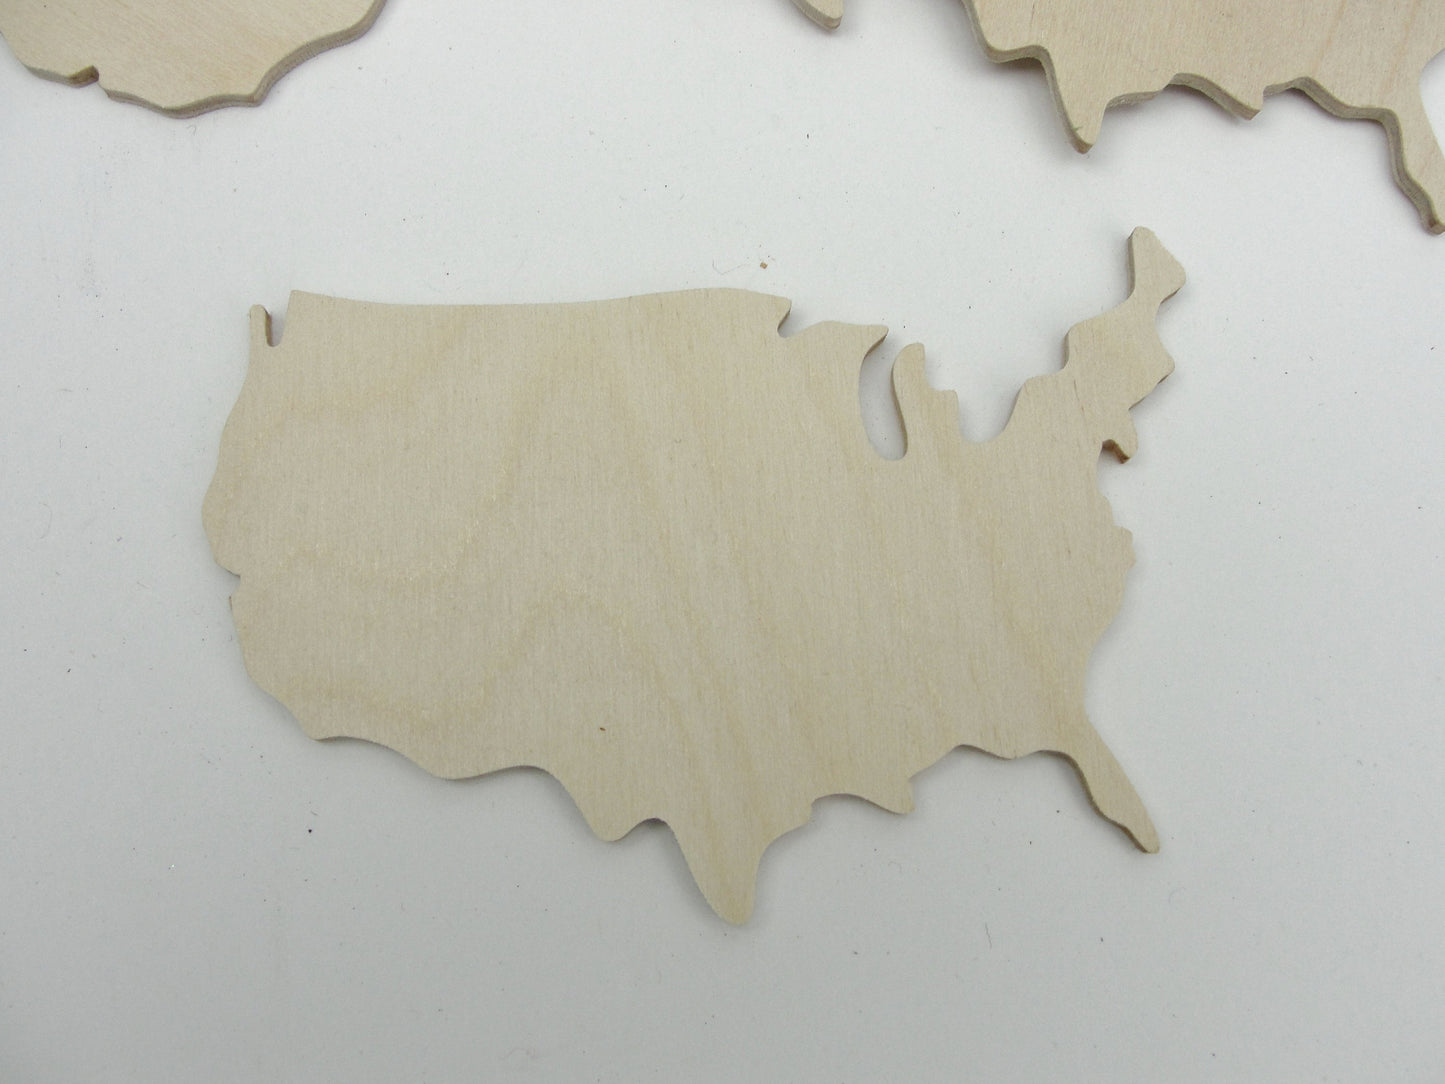 United States map wood cutouts set of 4 - Wood parts - Craft Supply House